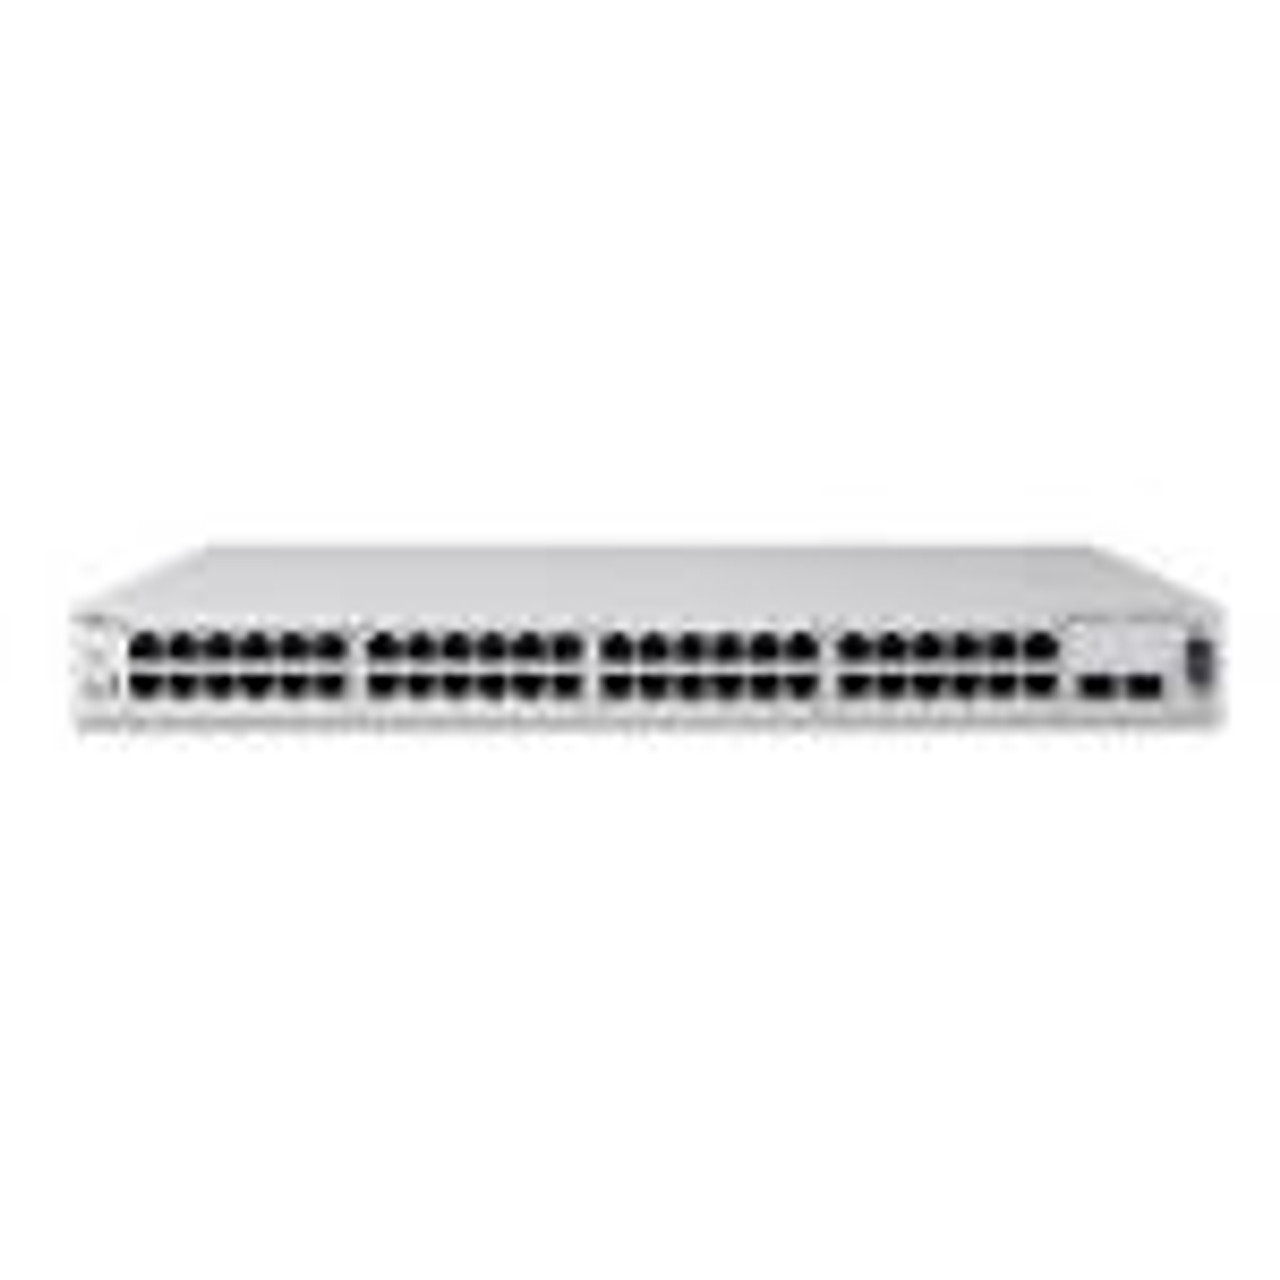 AL1001B03-E5 Nortel Gigabit Ethernet Routing 1U Switch 5510-48T with 48-Ports 10/100/1000 Ports plus 2 SFP Ports and a 1.5 Foot Stacking Cable (Refurbished)